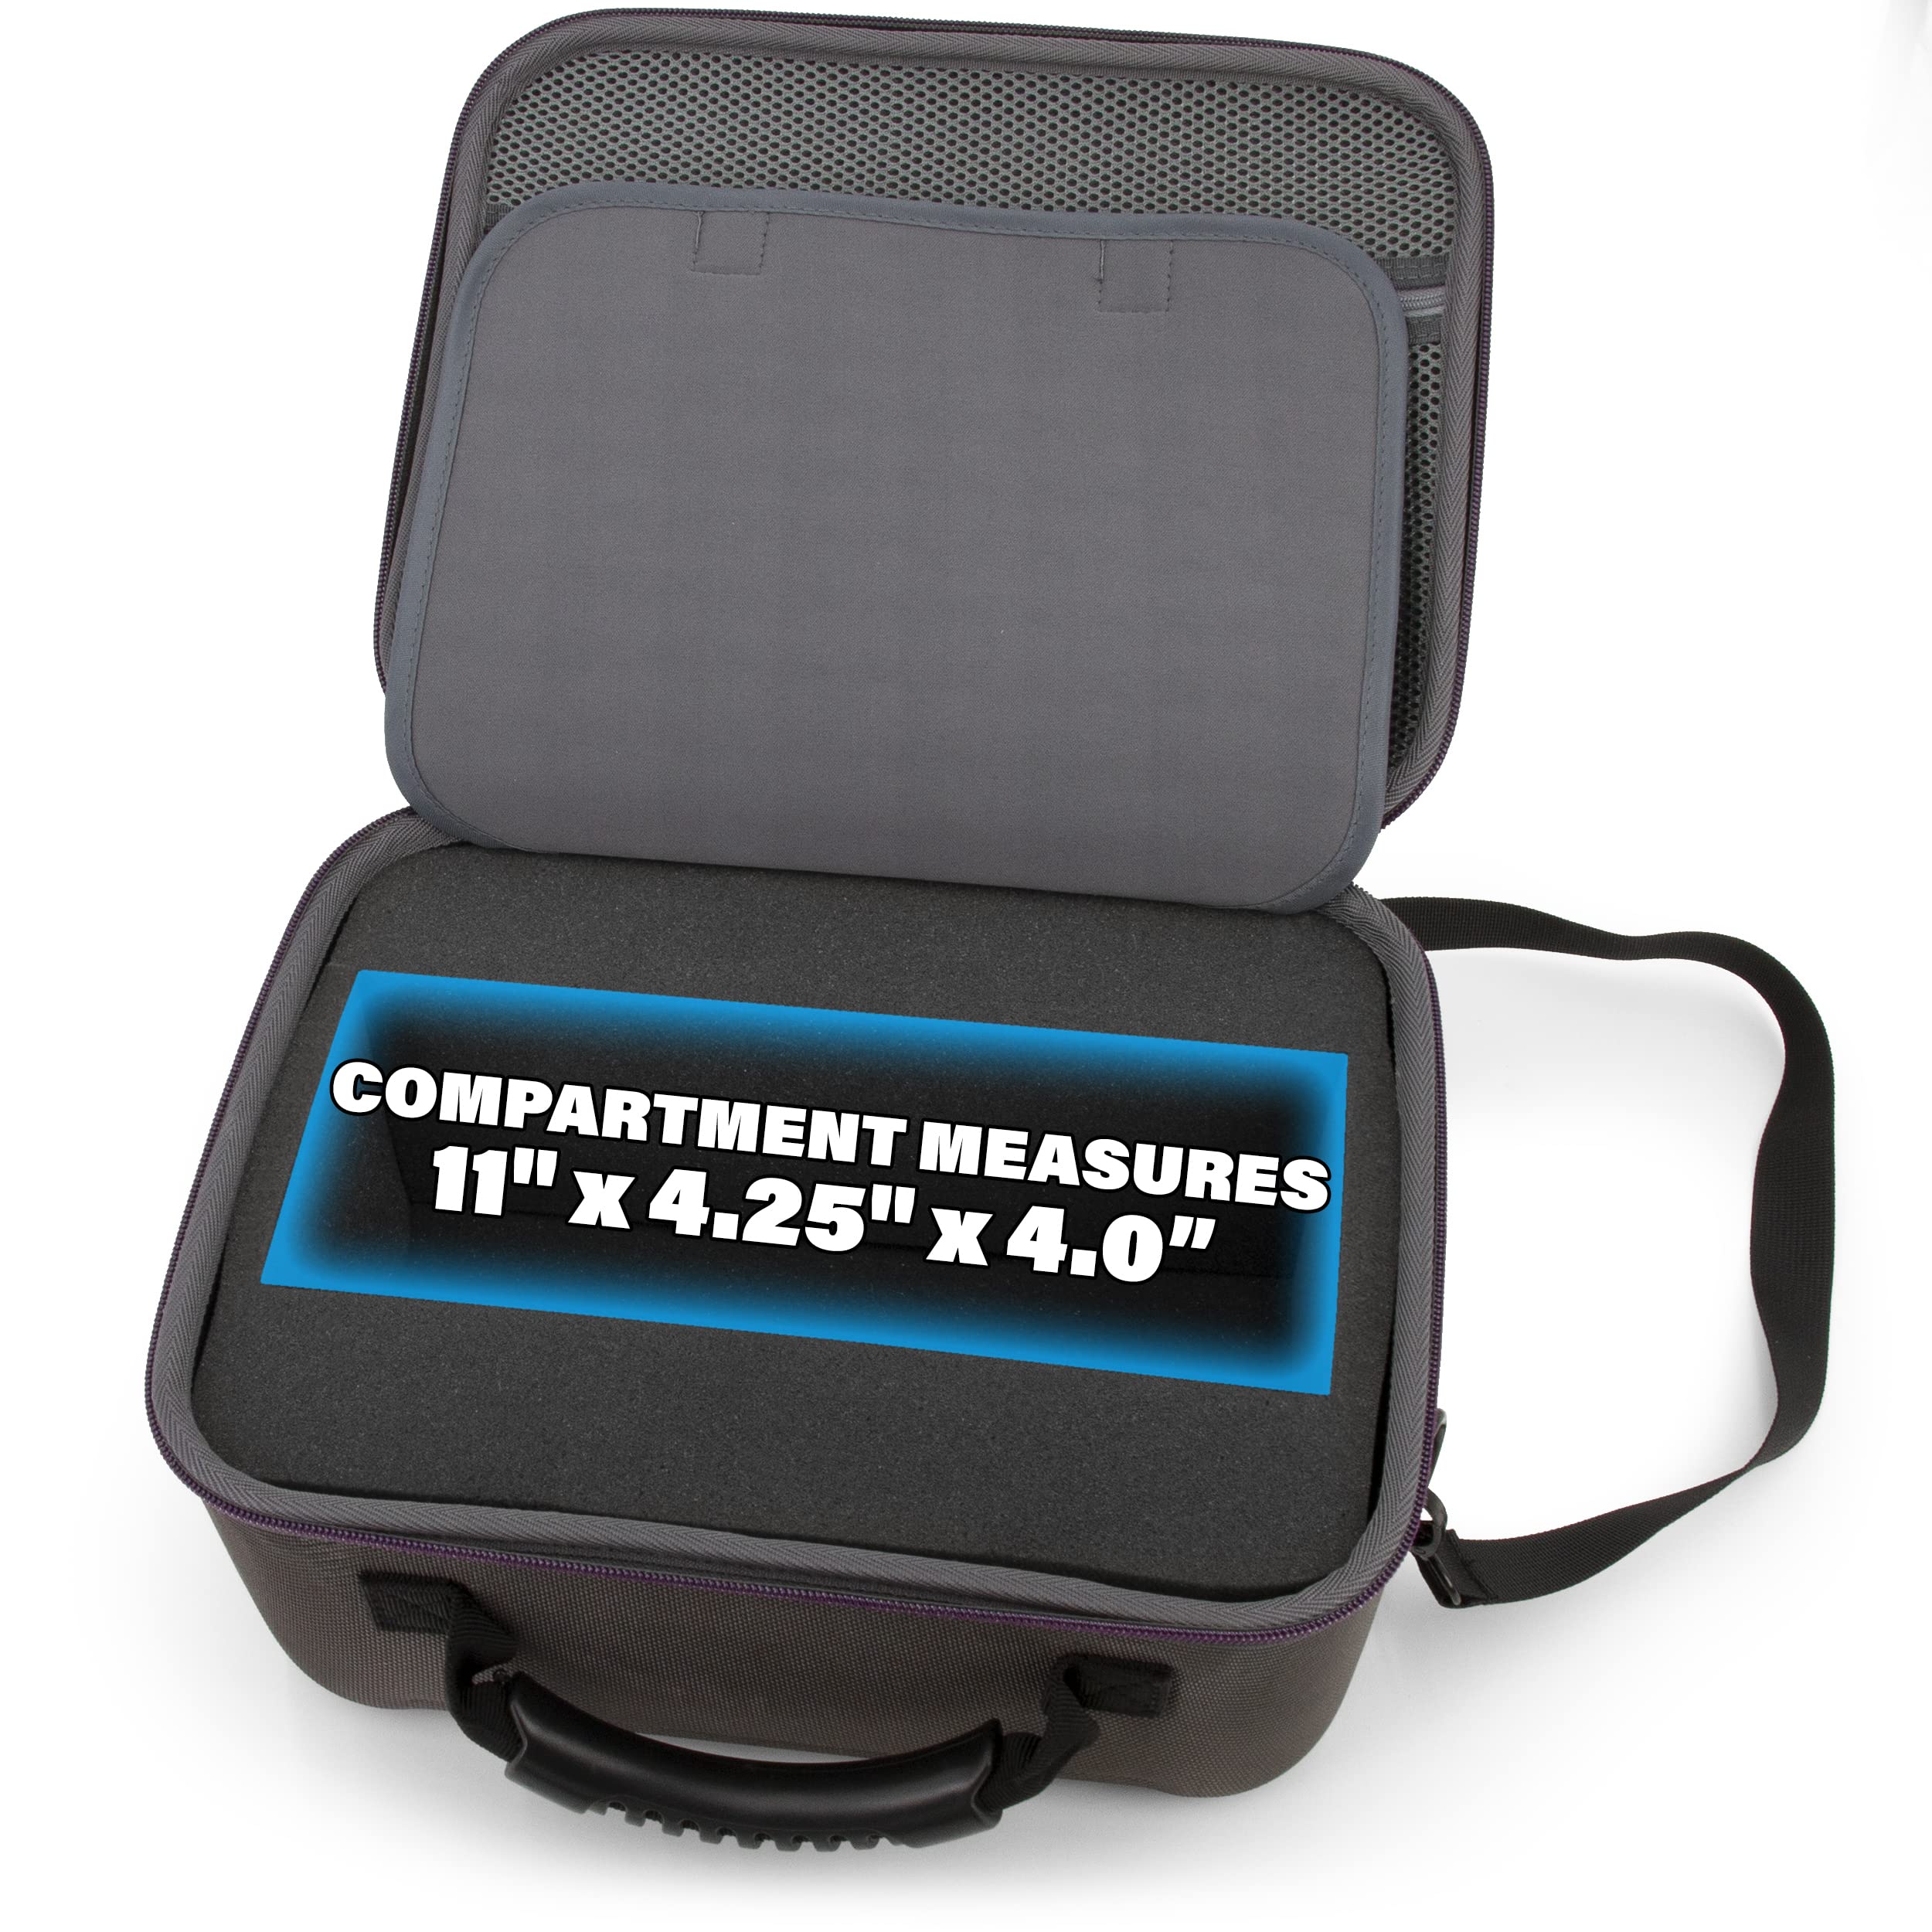 CASEMATIX Carrying Case Compatible With Meeting Owl Pro and Owl Camera 360 Video Conference Room Accessories